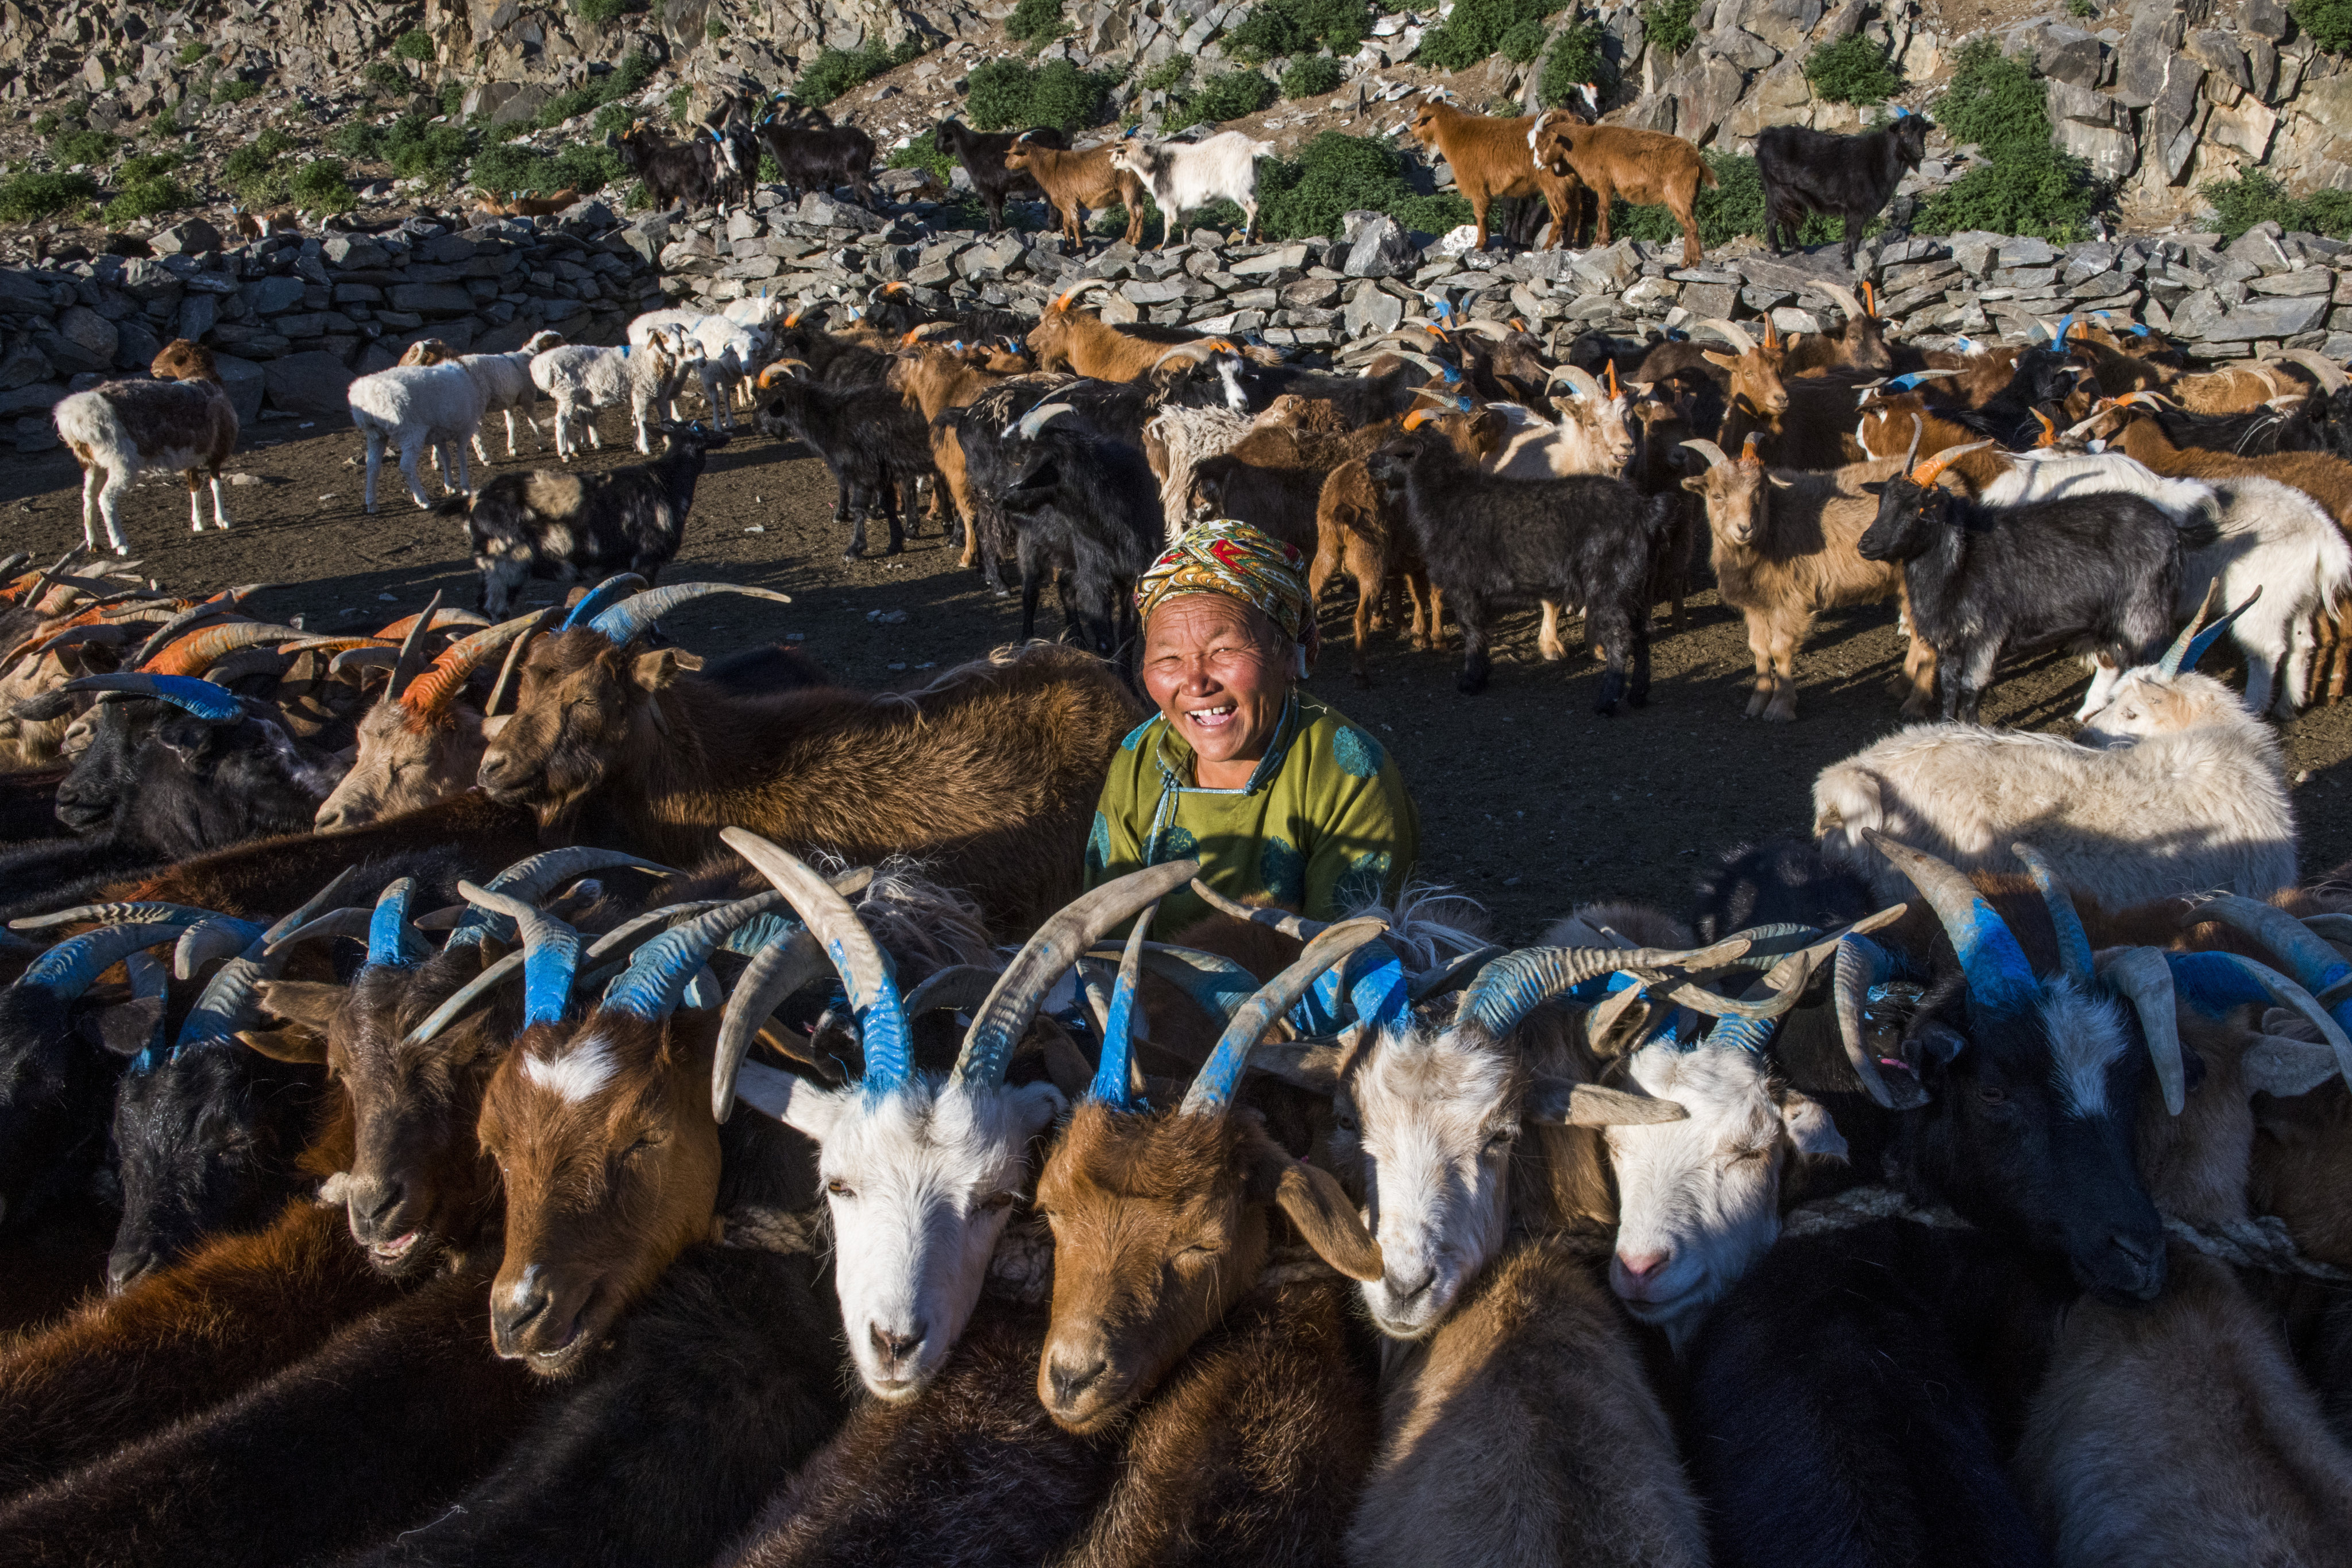 Mongolia has got the goats if investors want to cash in on cashmere. Getty Images